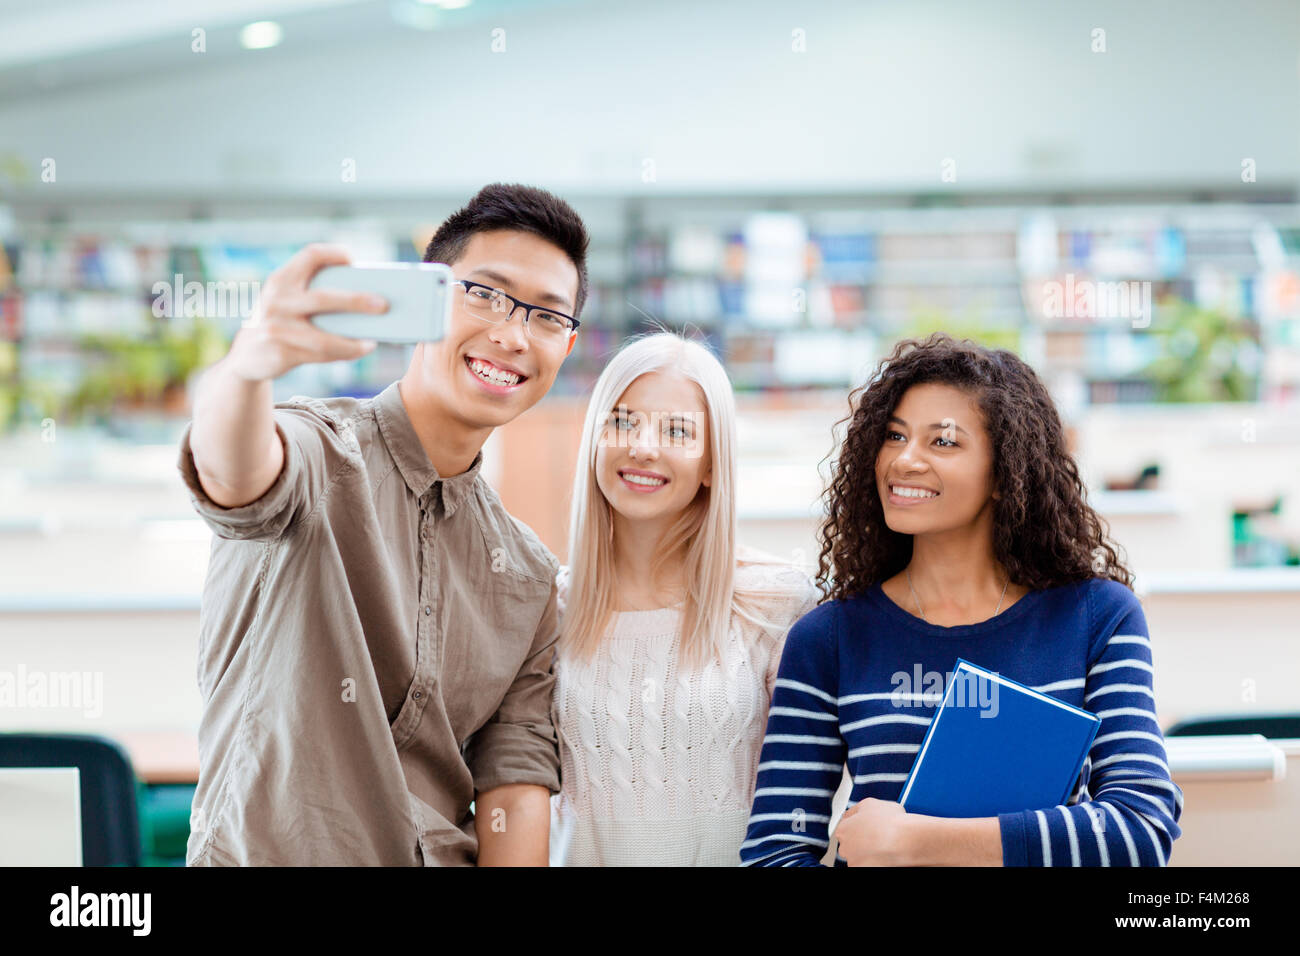 Smiling multi ethnic students making selfie photo on smartphone in the university library Stock Photo